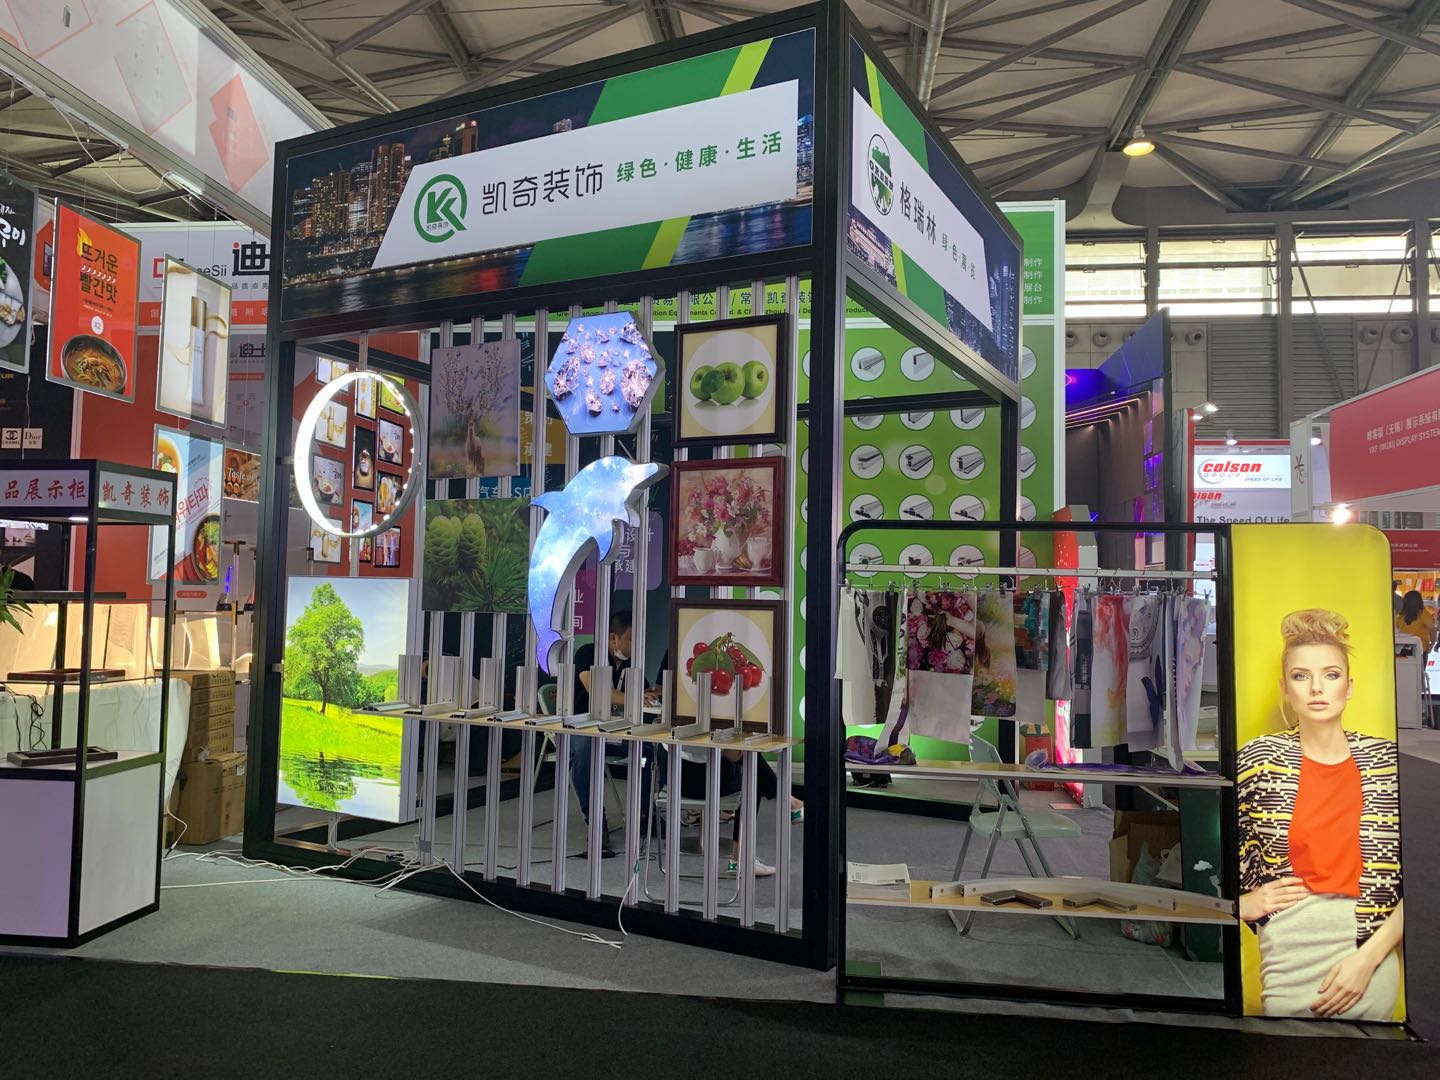 Exhibition booth manufacturer teaches you to build economical and practical exhibition booths